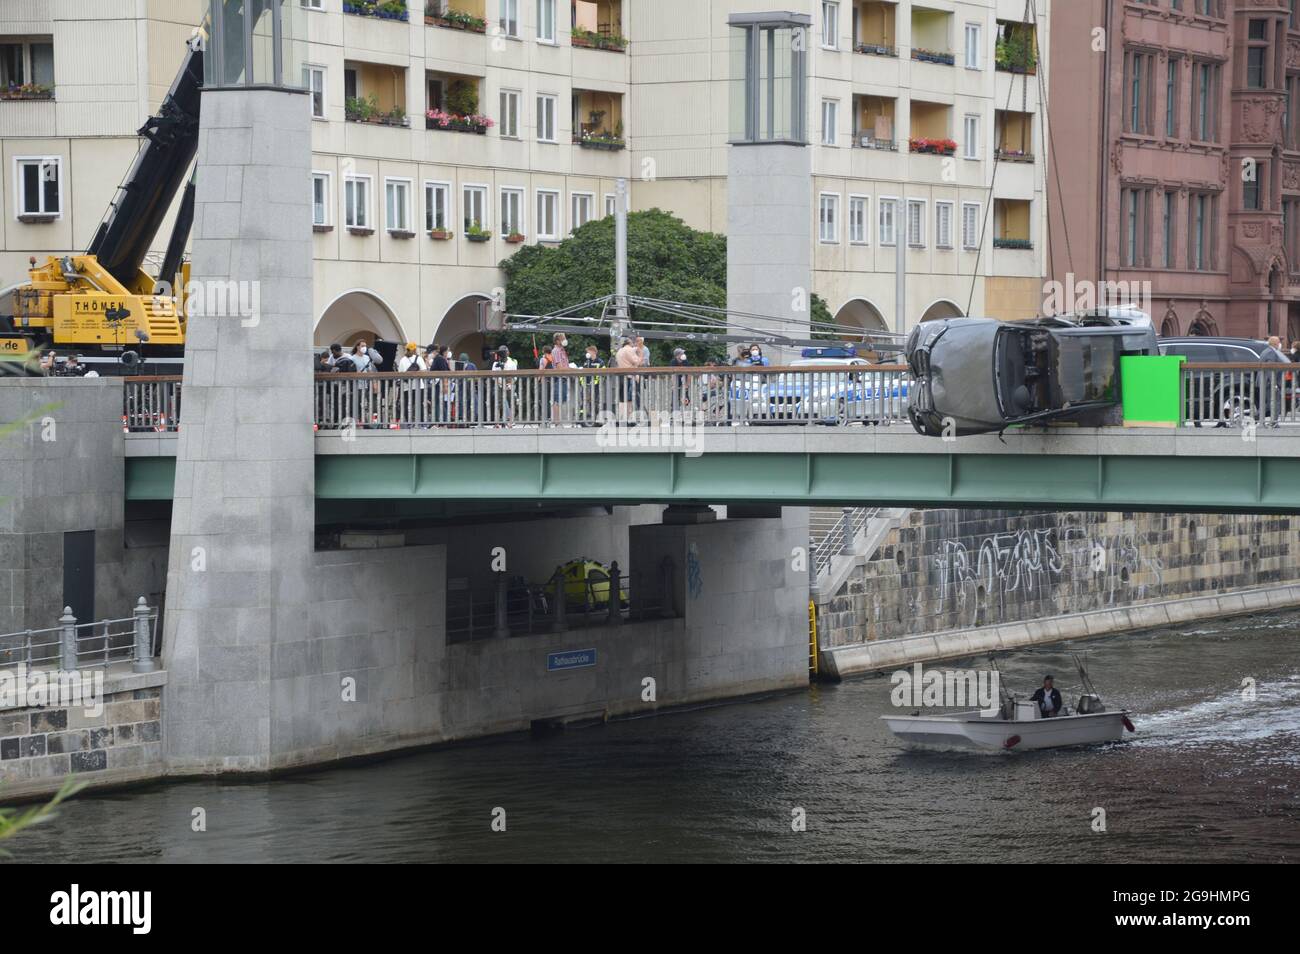 The shooting of the action thriller film 'Retribution' on the Rathausbrücke (bridge) in Berlin, Germany - July 22, 2021. Stock Photo